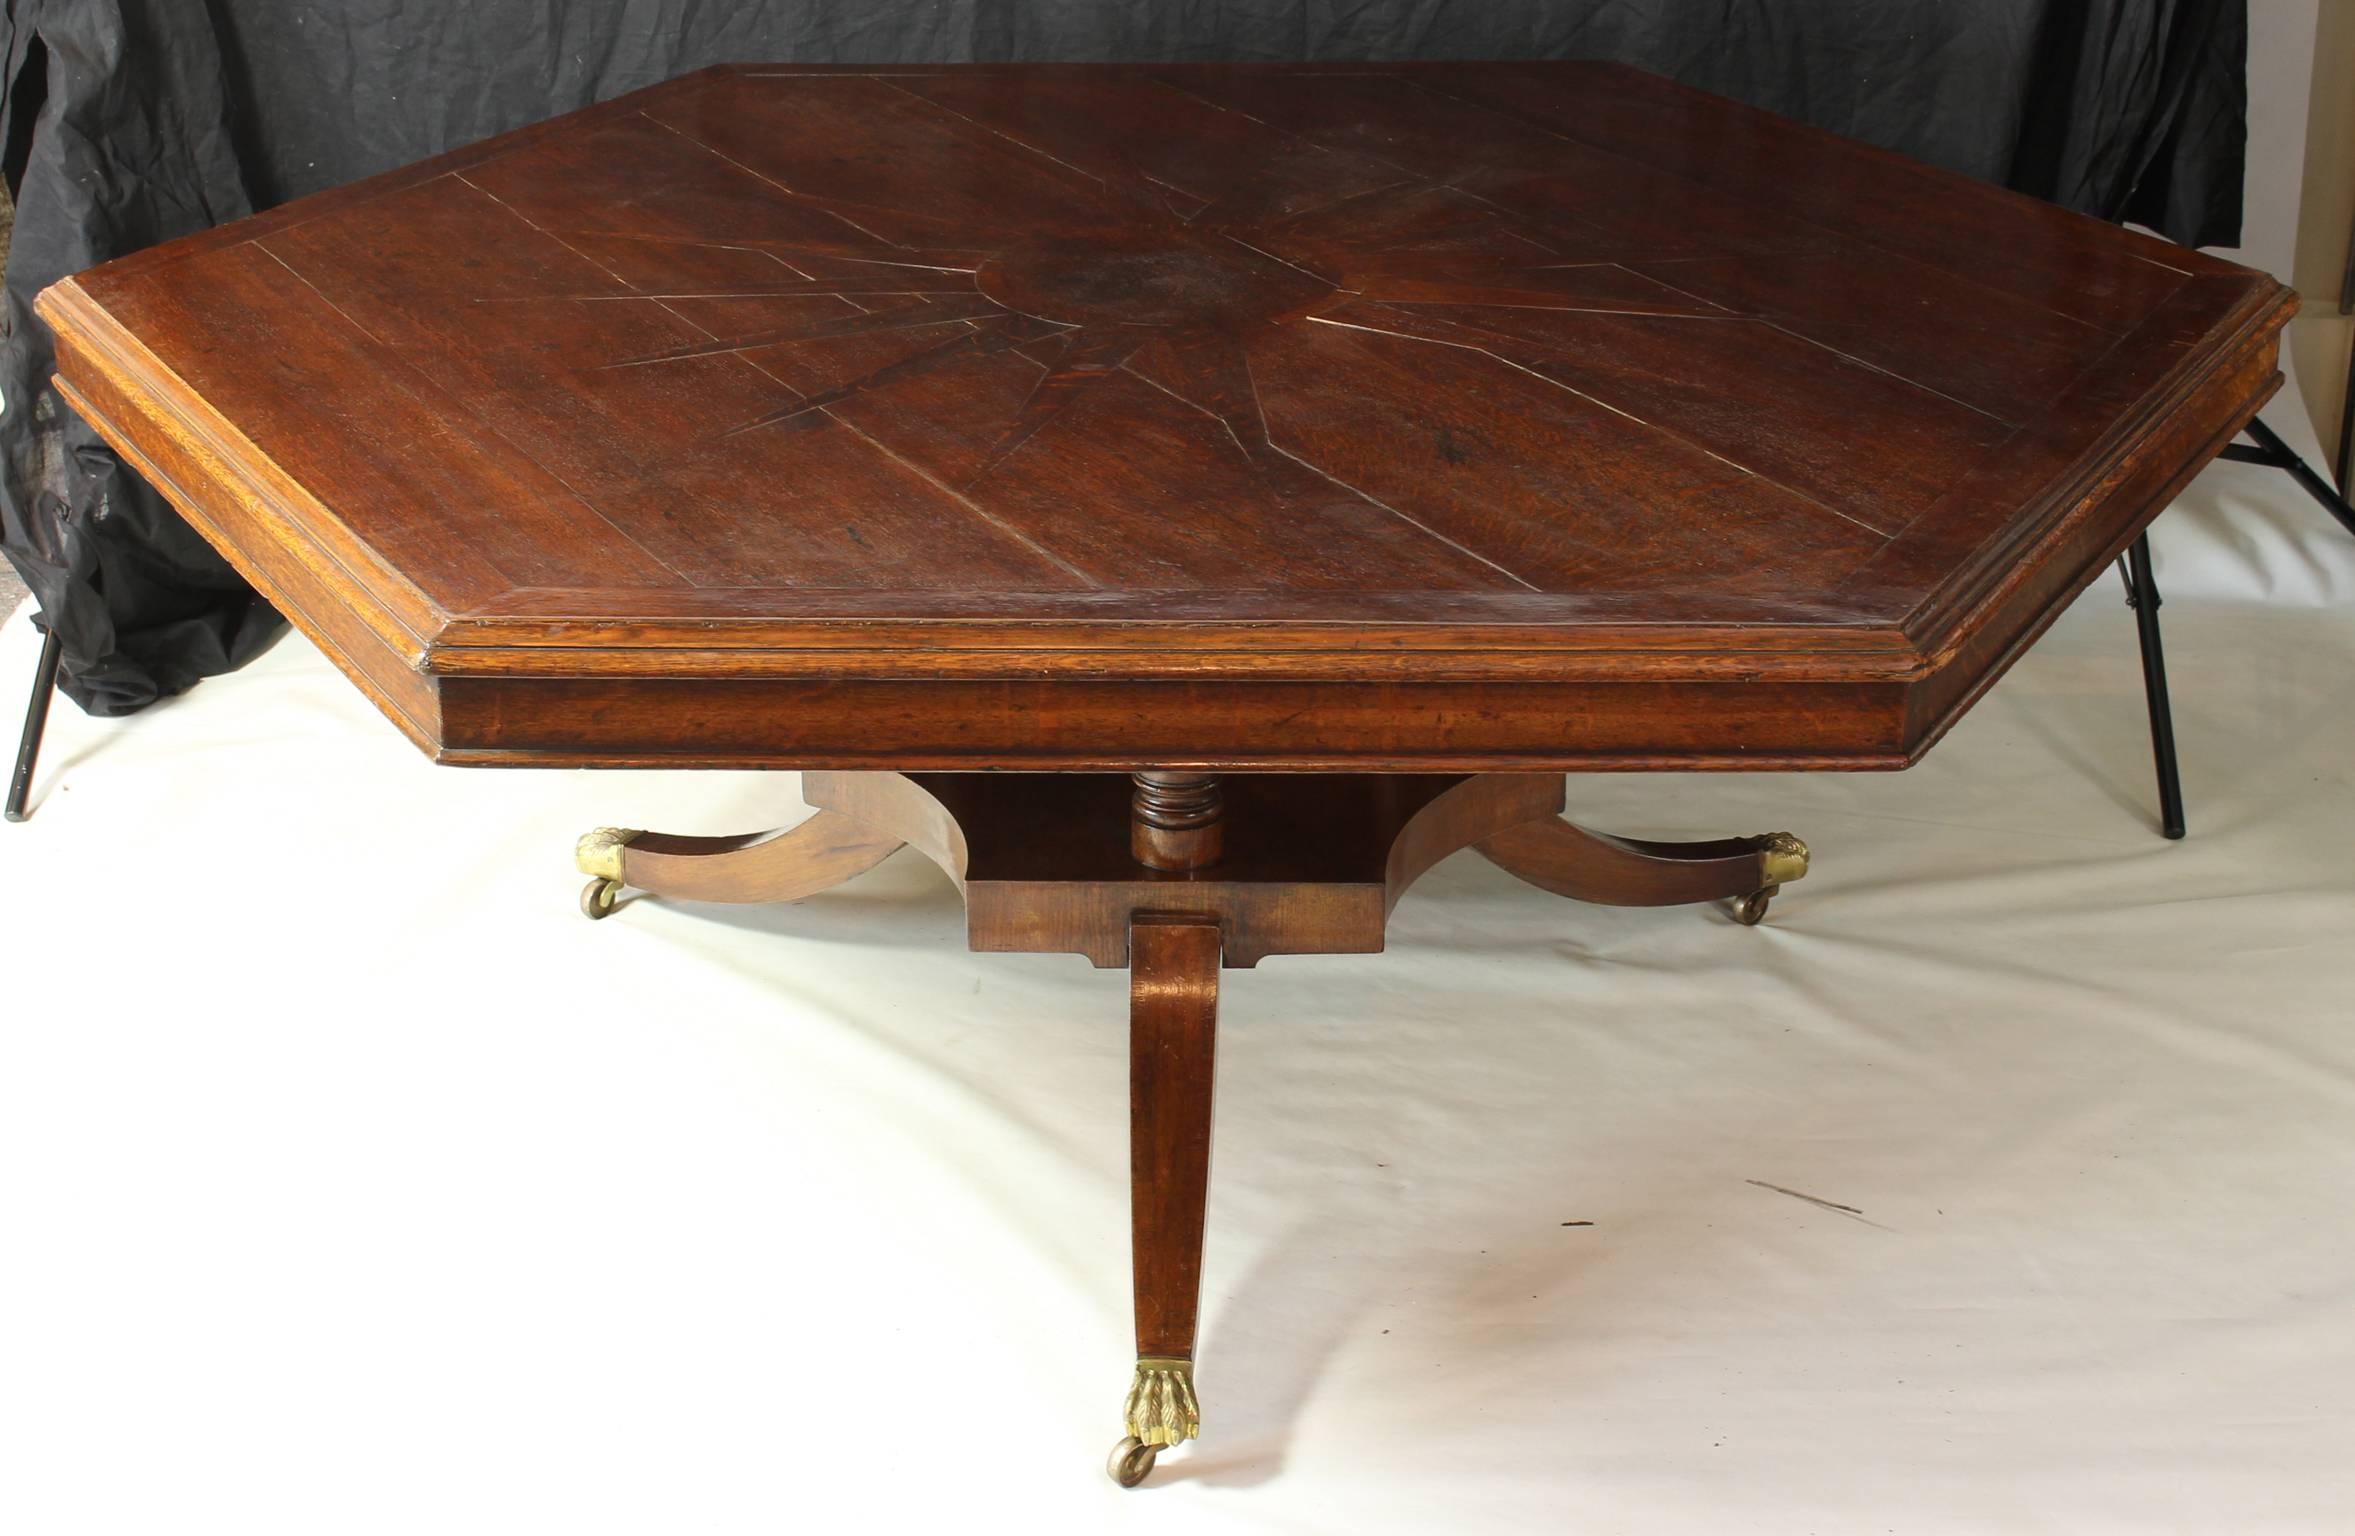 A large mid-19th century English oak hexagonal dining or center table 